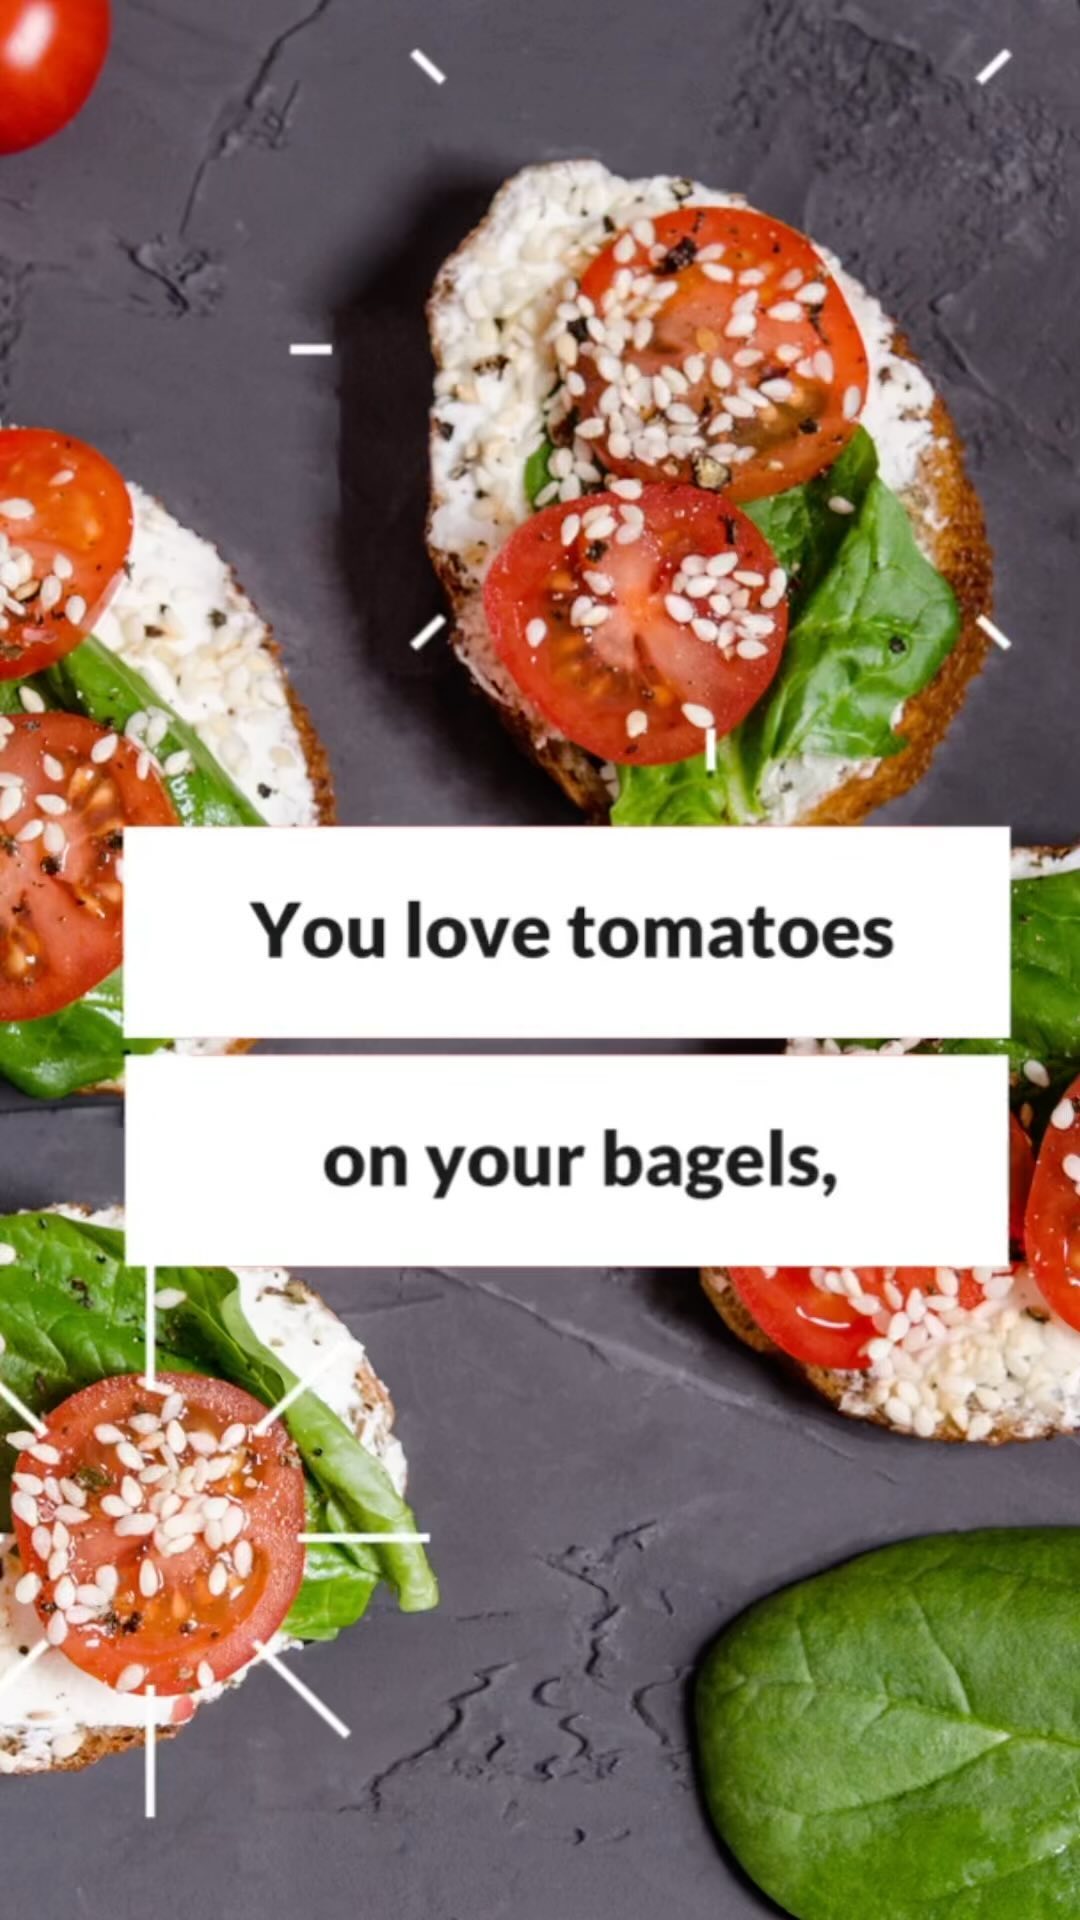 We love that you love tomatoes
.
Go on - have them any way you want!
.
Go Go Go Go on! 
.
.
.
.
#thetomatosourcenz #tomatoesnz #nztomatoes #mealinspo #mealinspiration